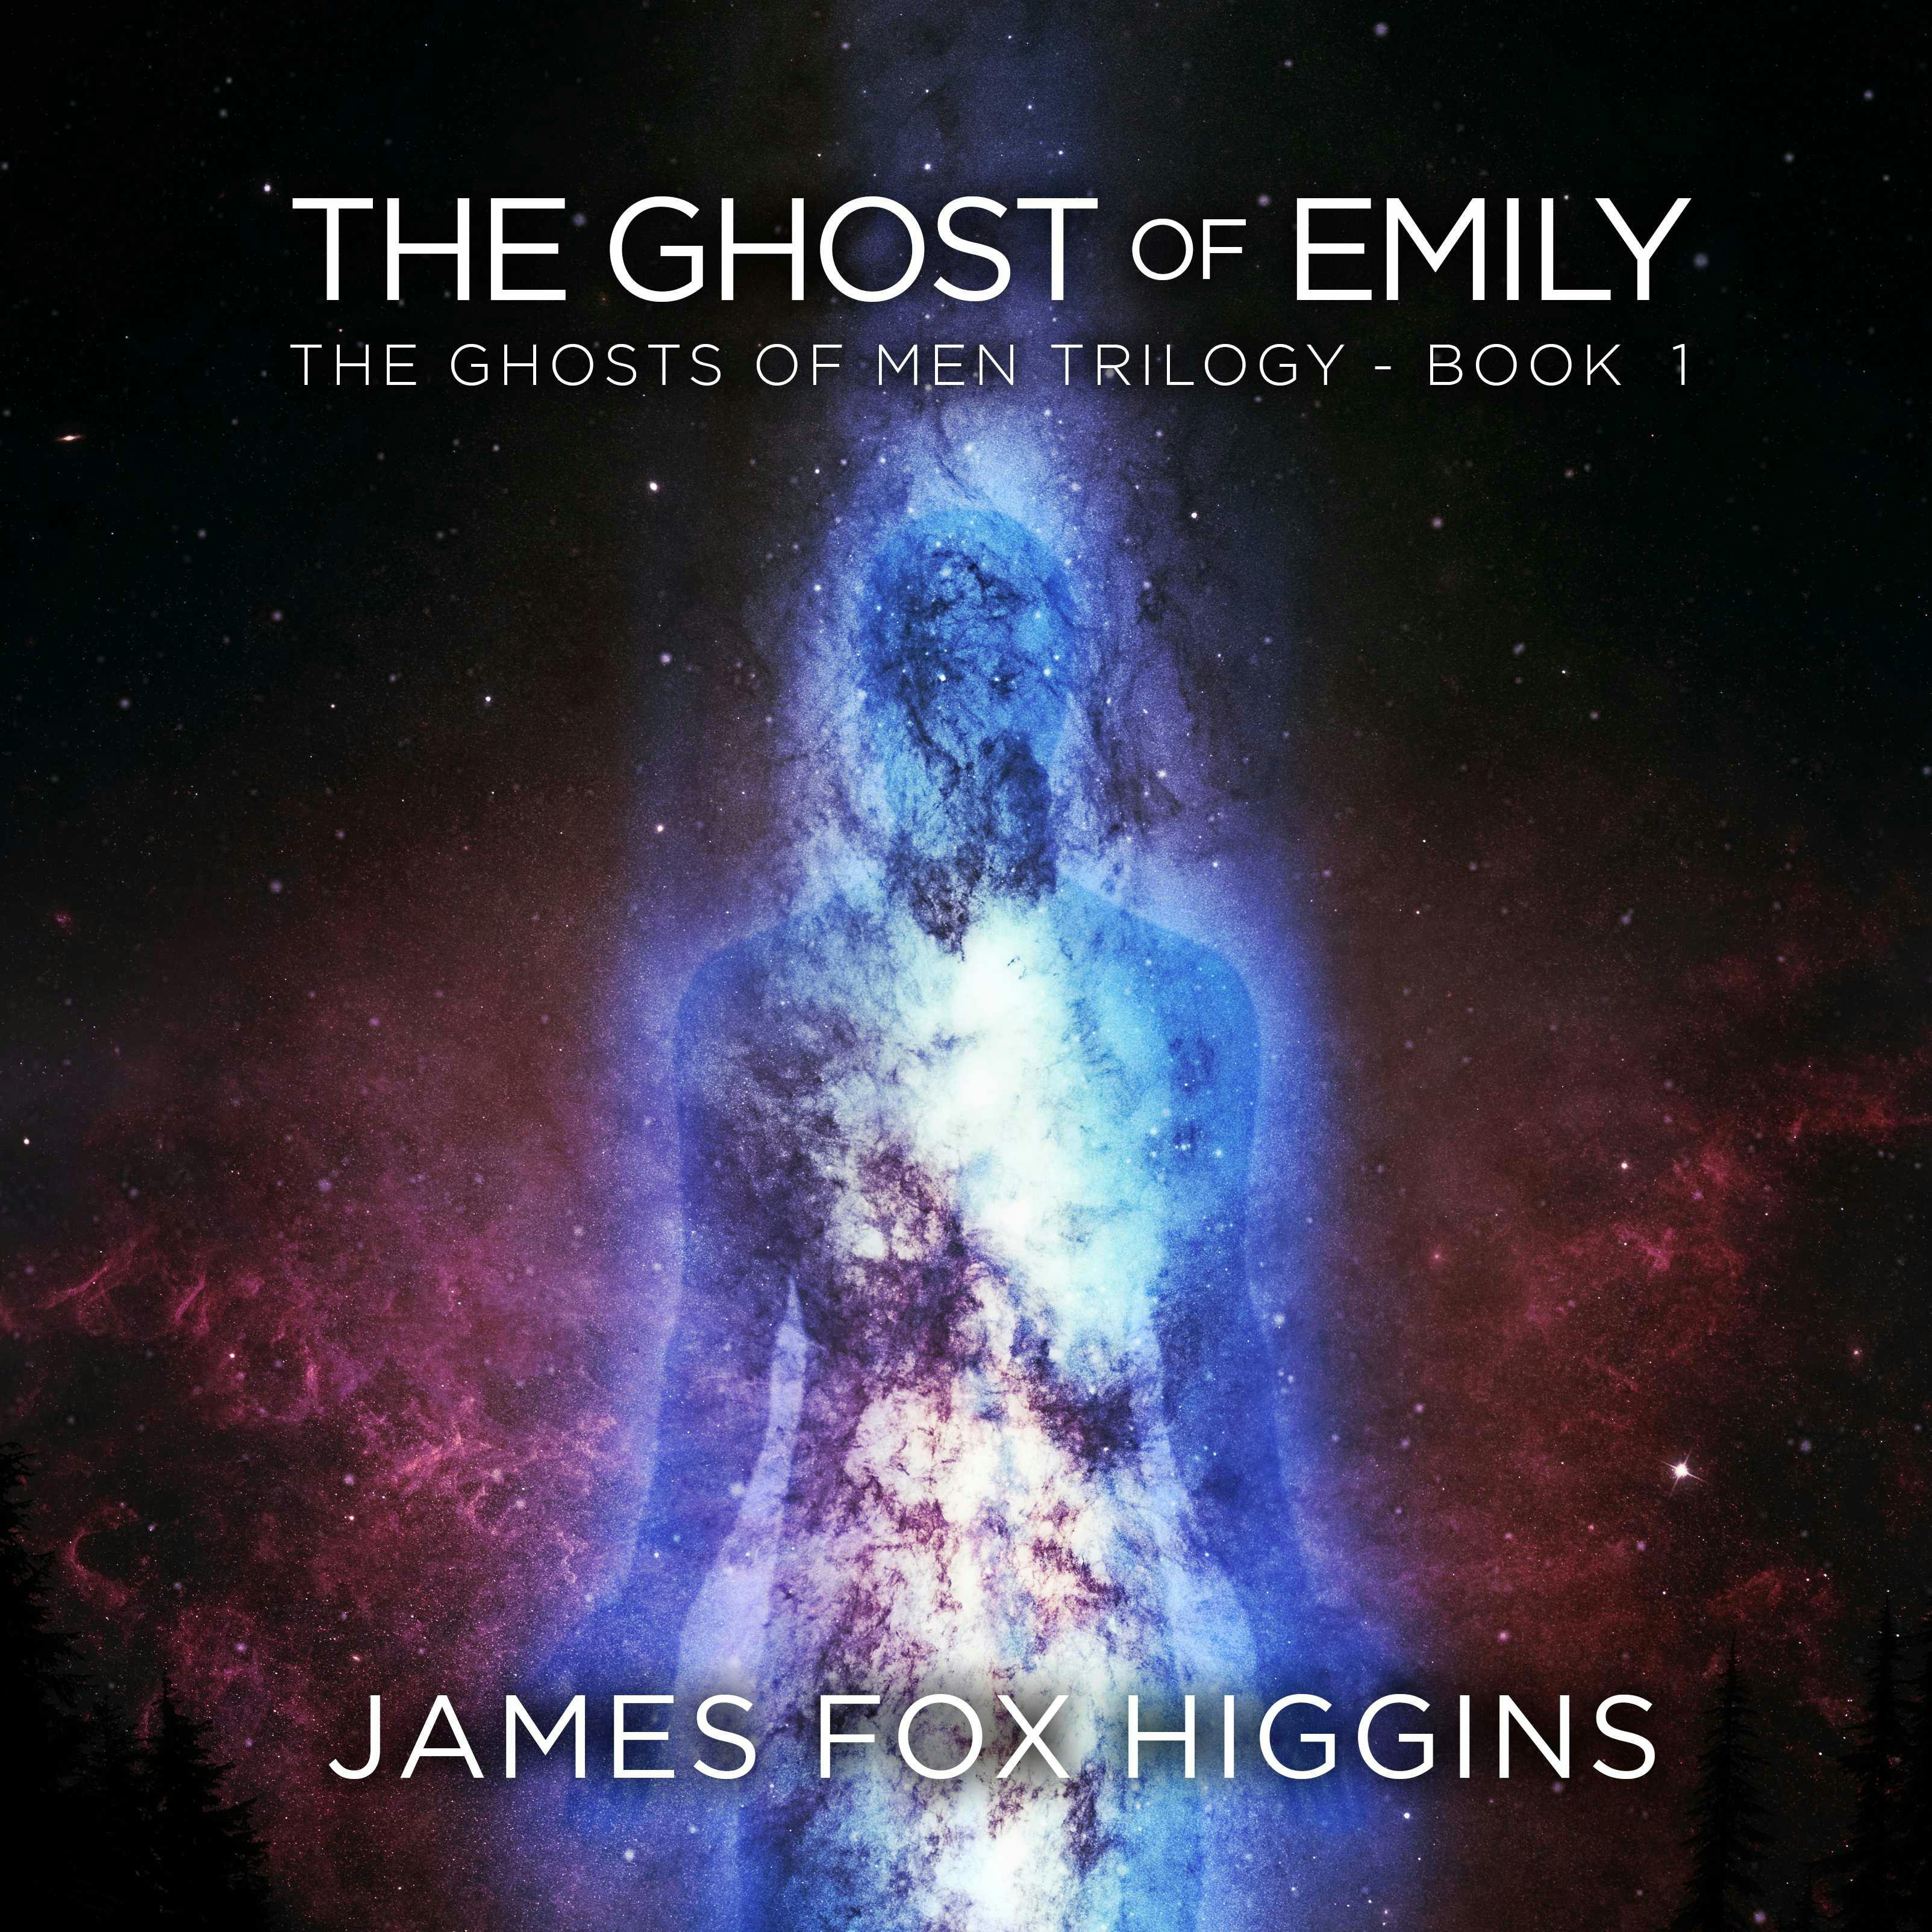 The Ghost of Emily - James Fox Higgins